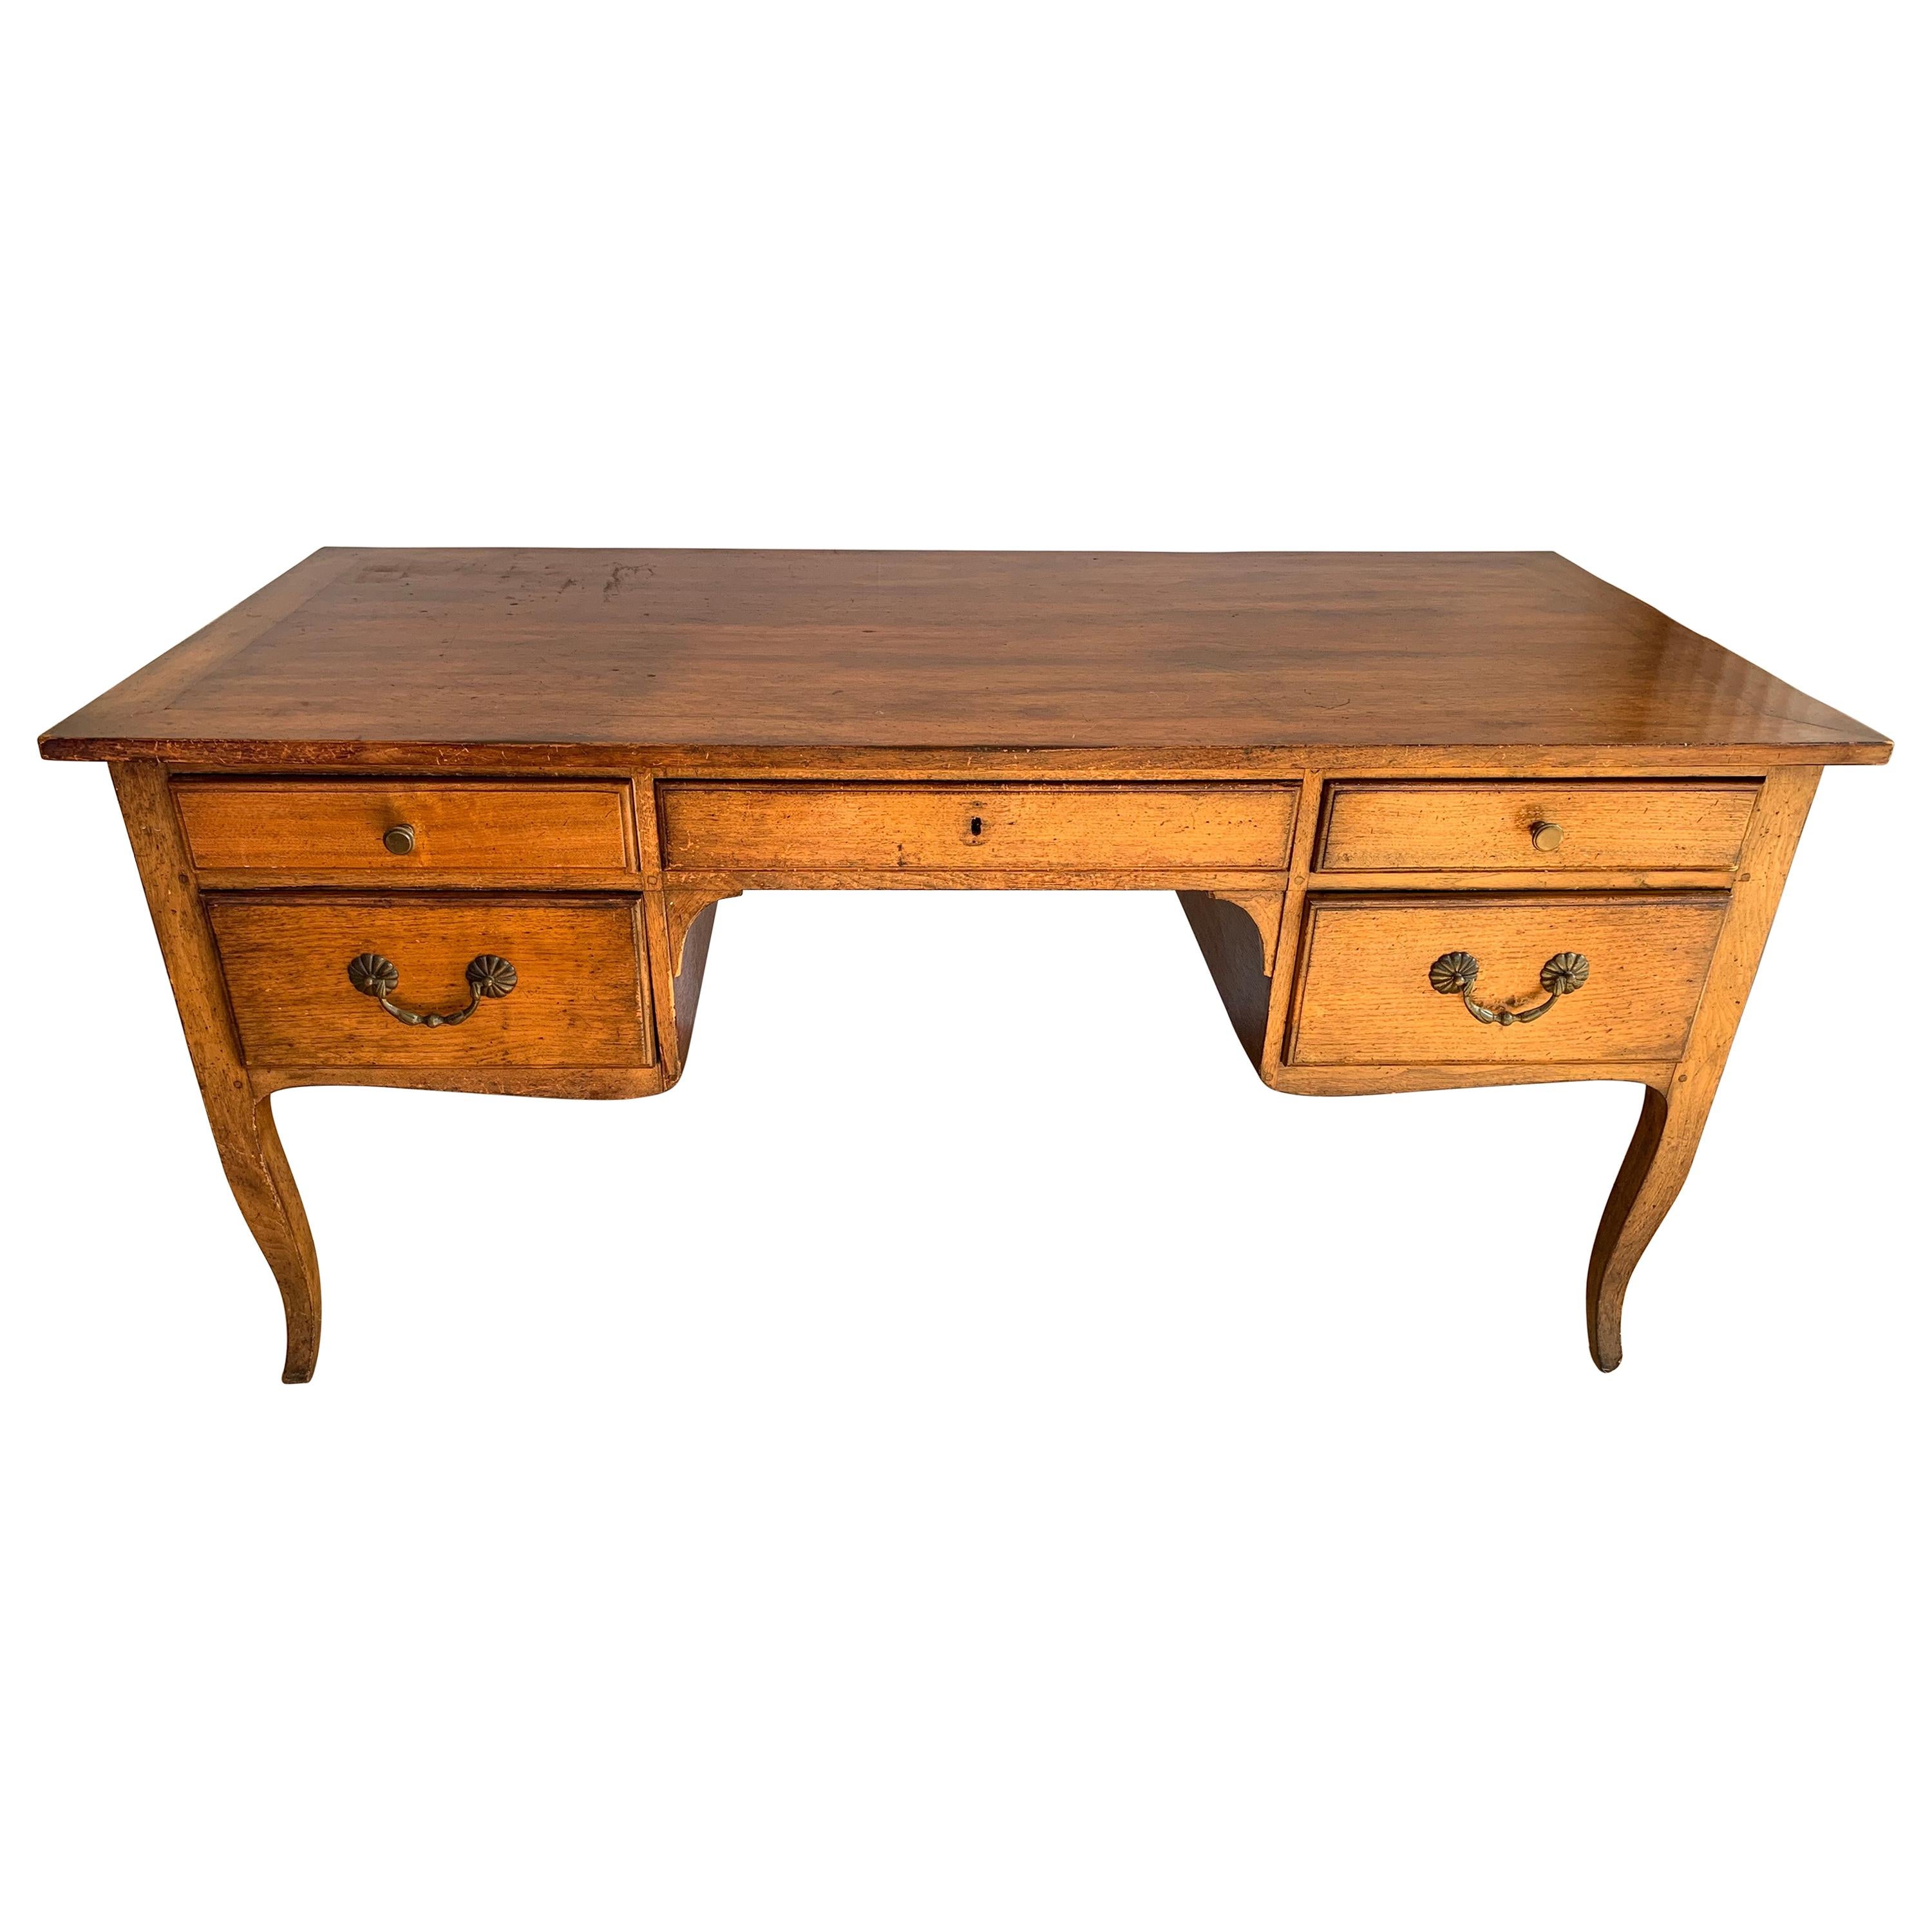 Antique French Provincial Louis XV Style Desk